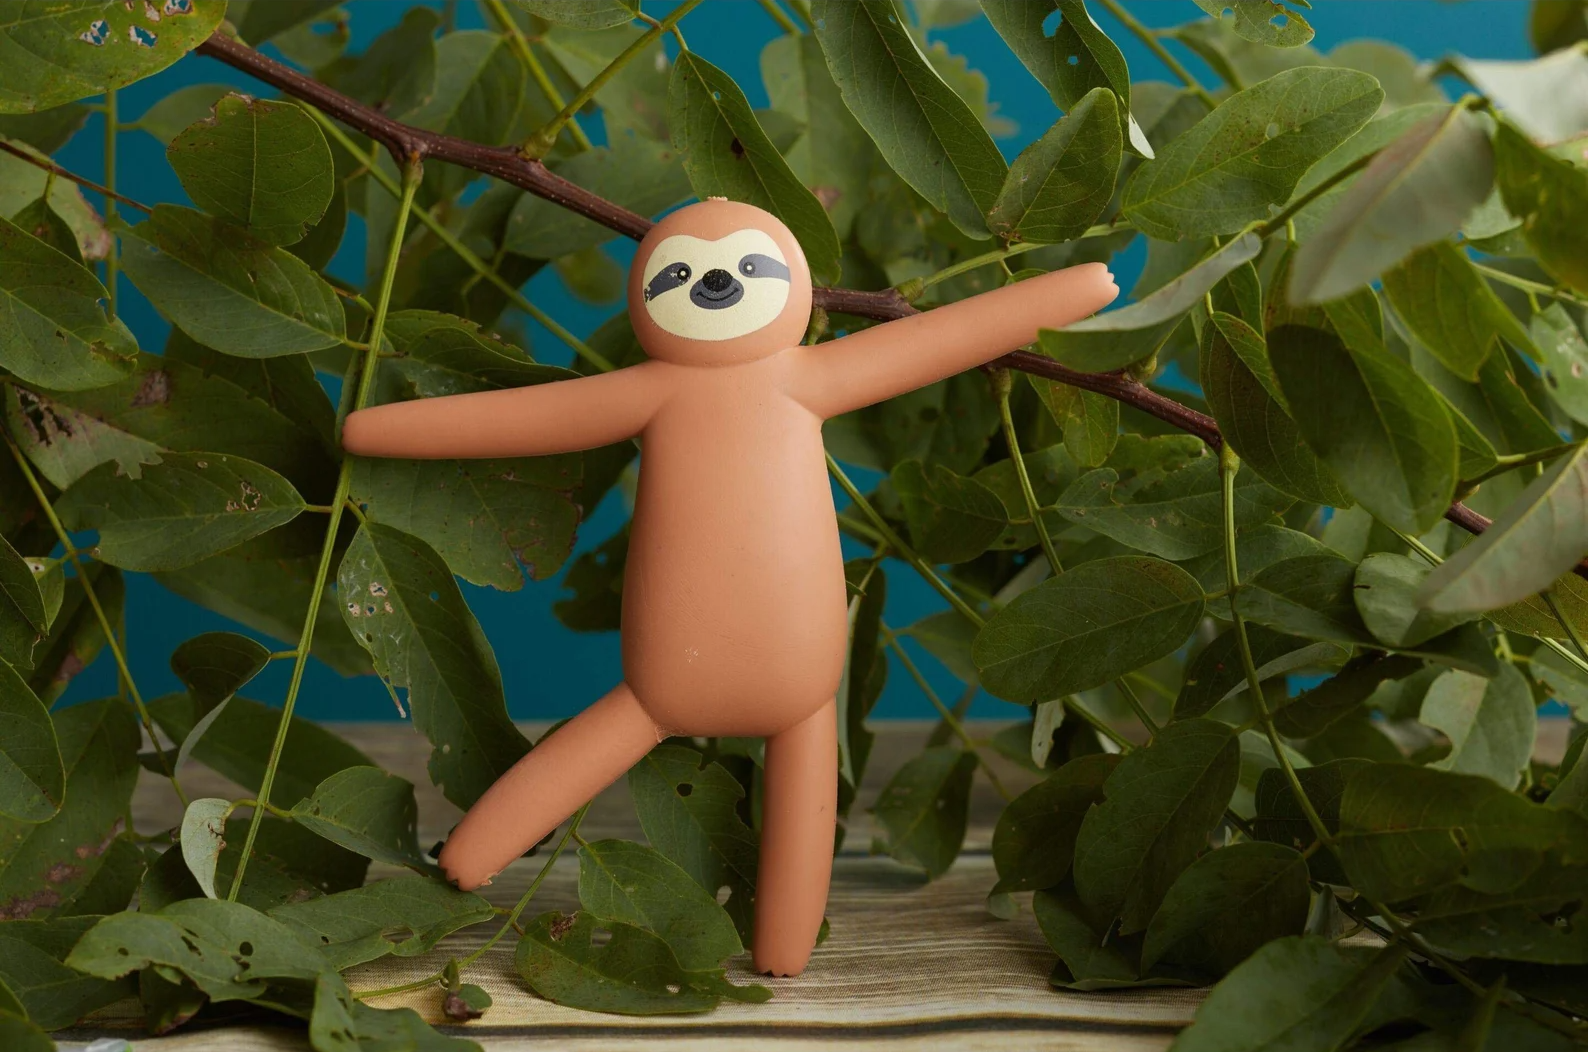 Toy sloth figure with arms wide open